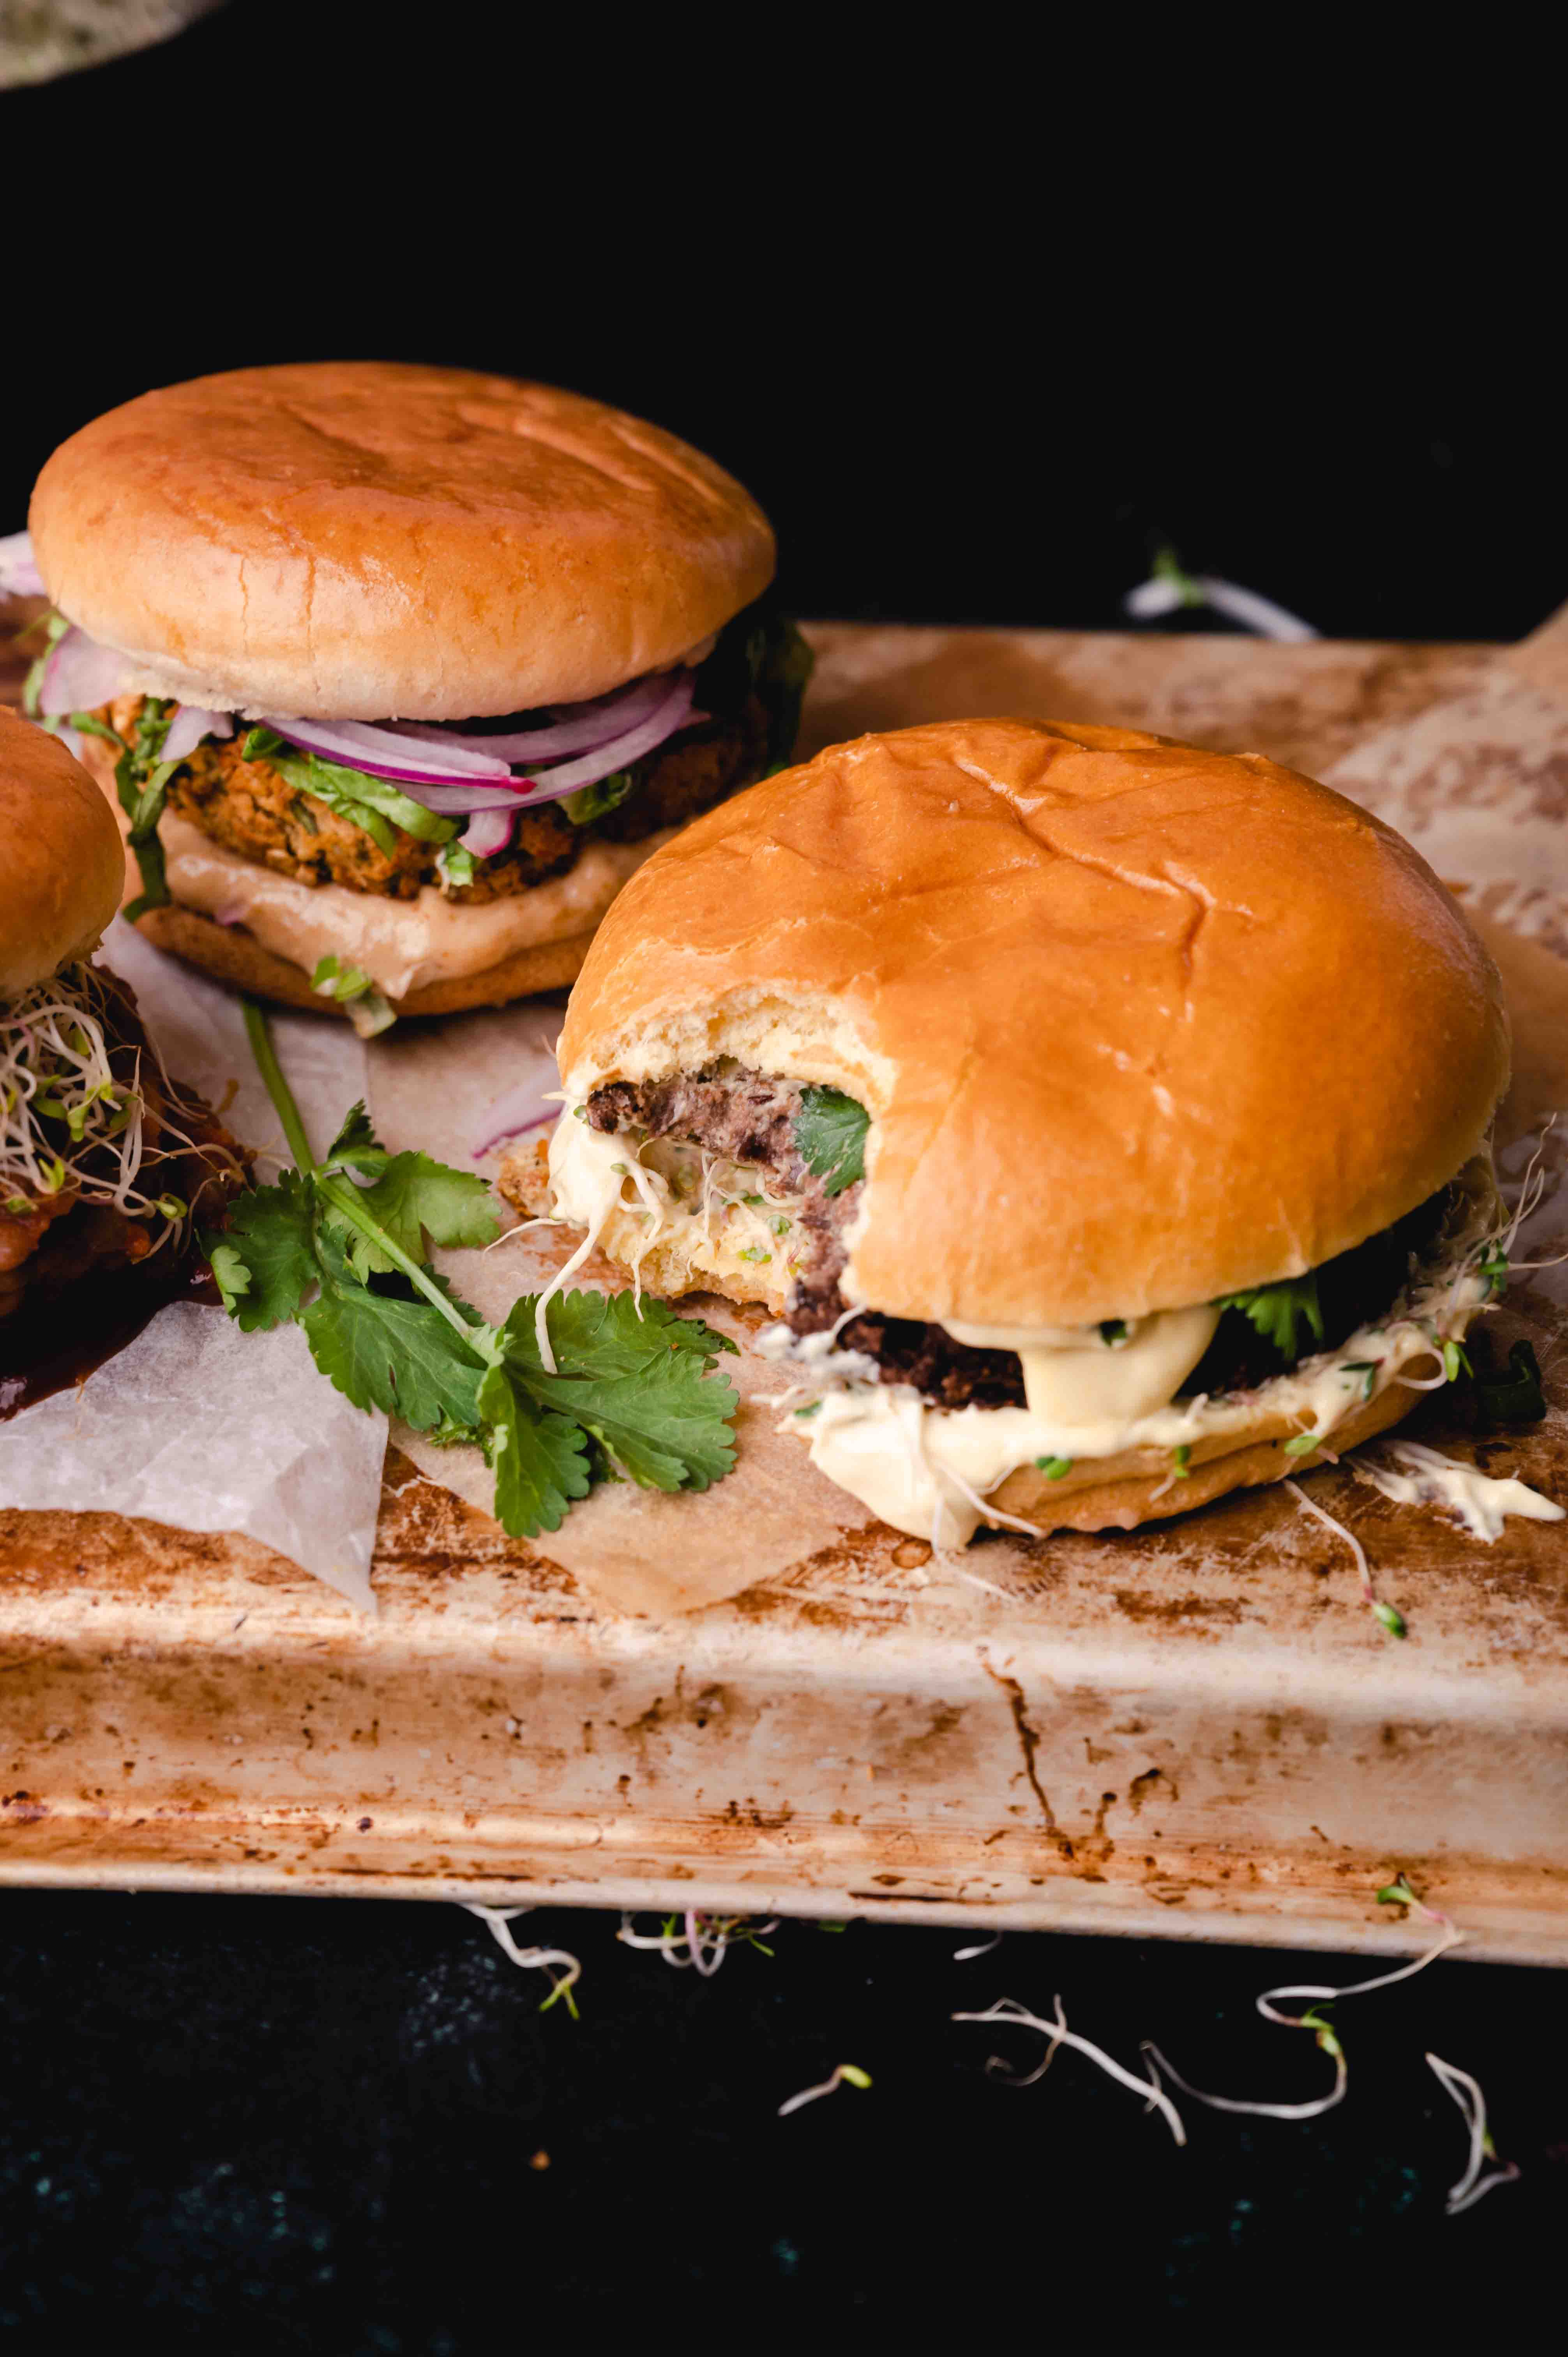 Two gourmet burgers with toppings on a rustic wooden board, accompanied by sprouts and herbs.